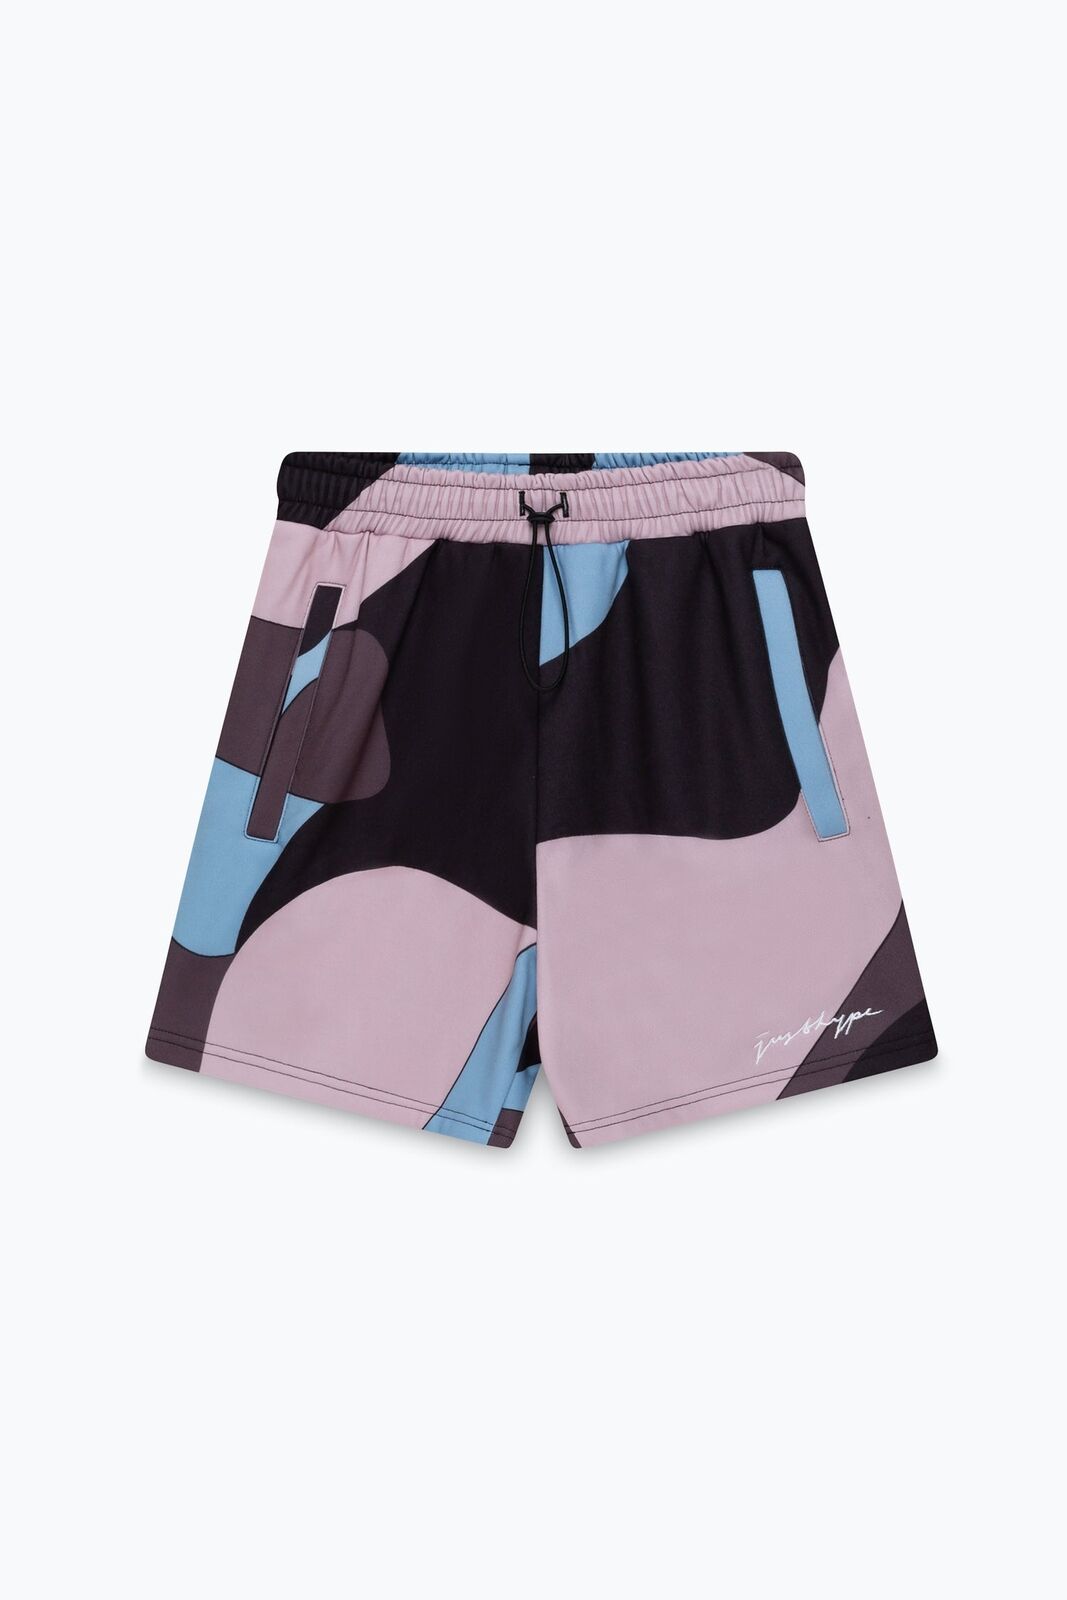 Hype Kids Multi Squiggle Camo Shorts - 11/12Y